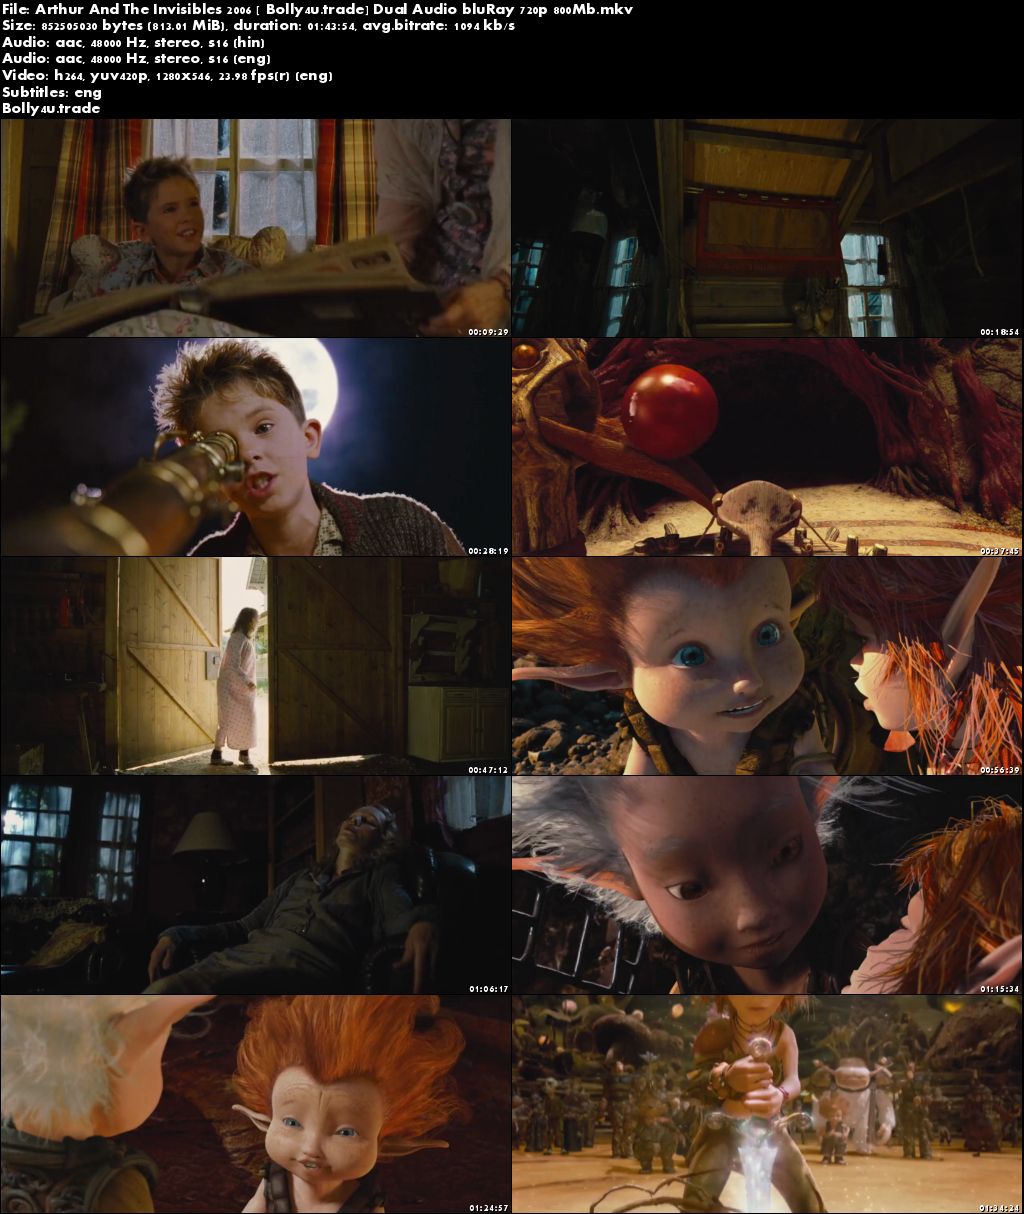 Arthur And The Invisibles 2006 BRRip 800Mb Hindi Dual Audio 720p Download